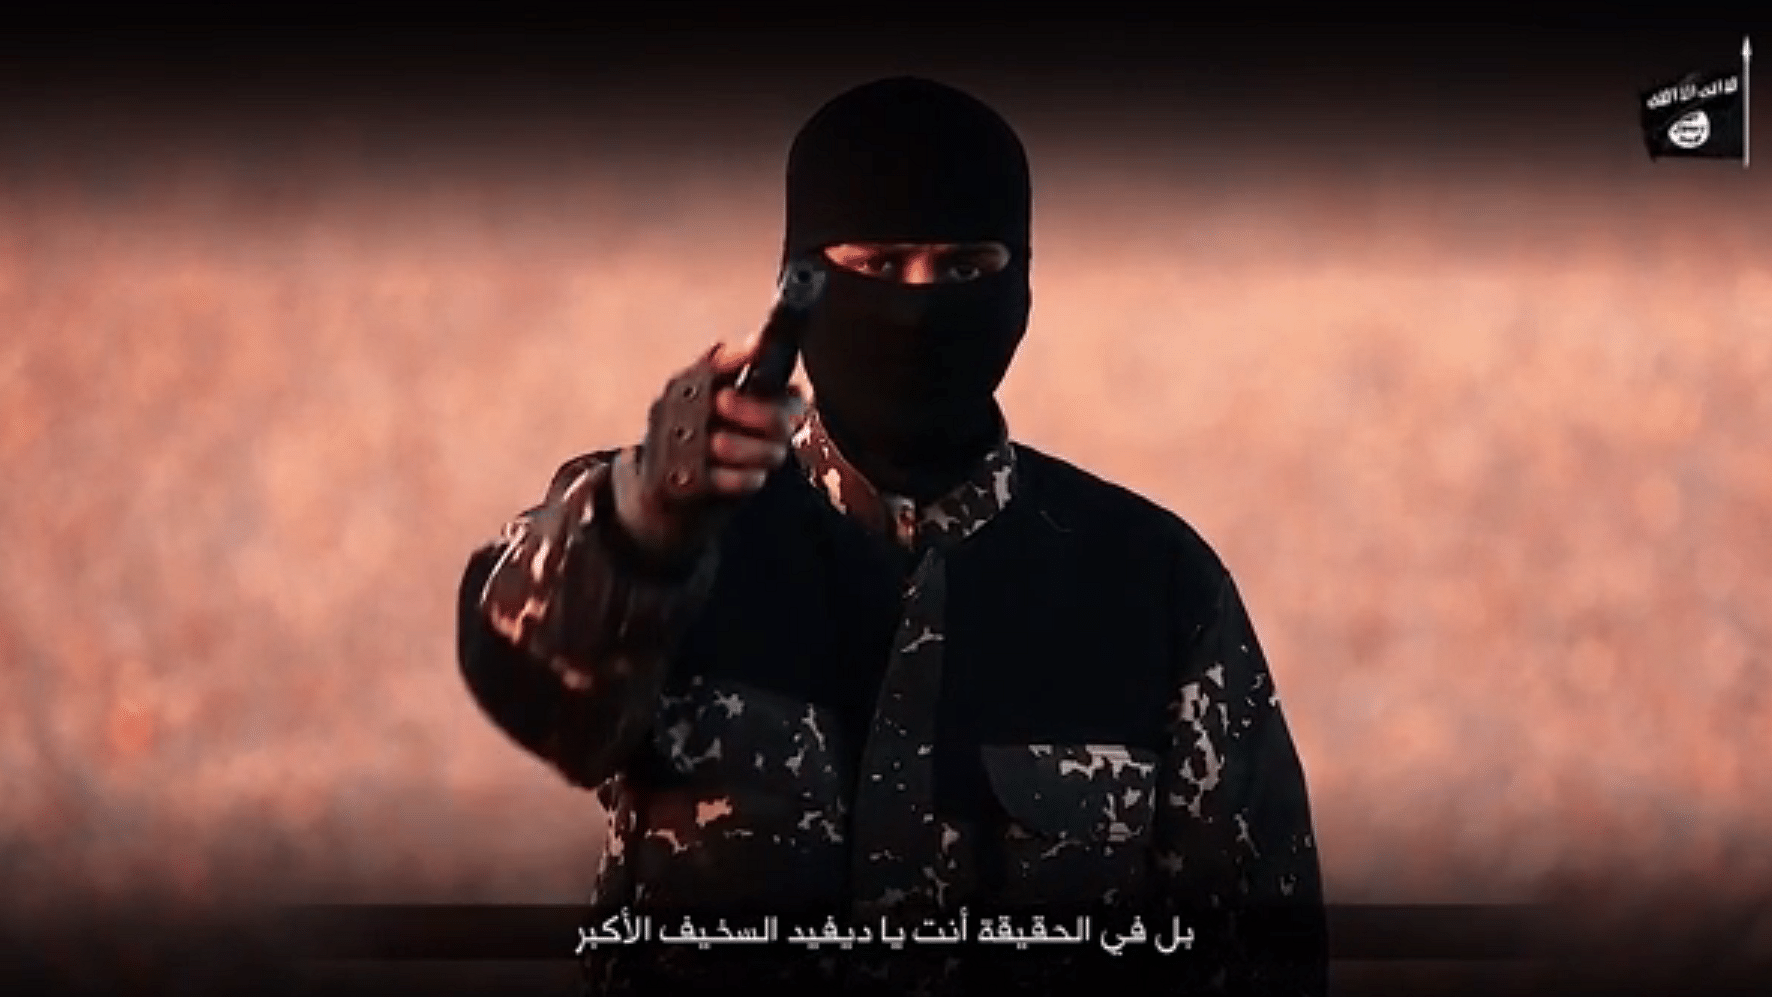 Snapshot from the video released by ISIS. (Photo: Video Screengrab)